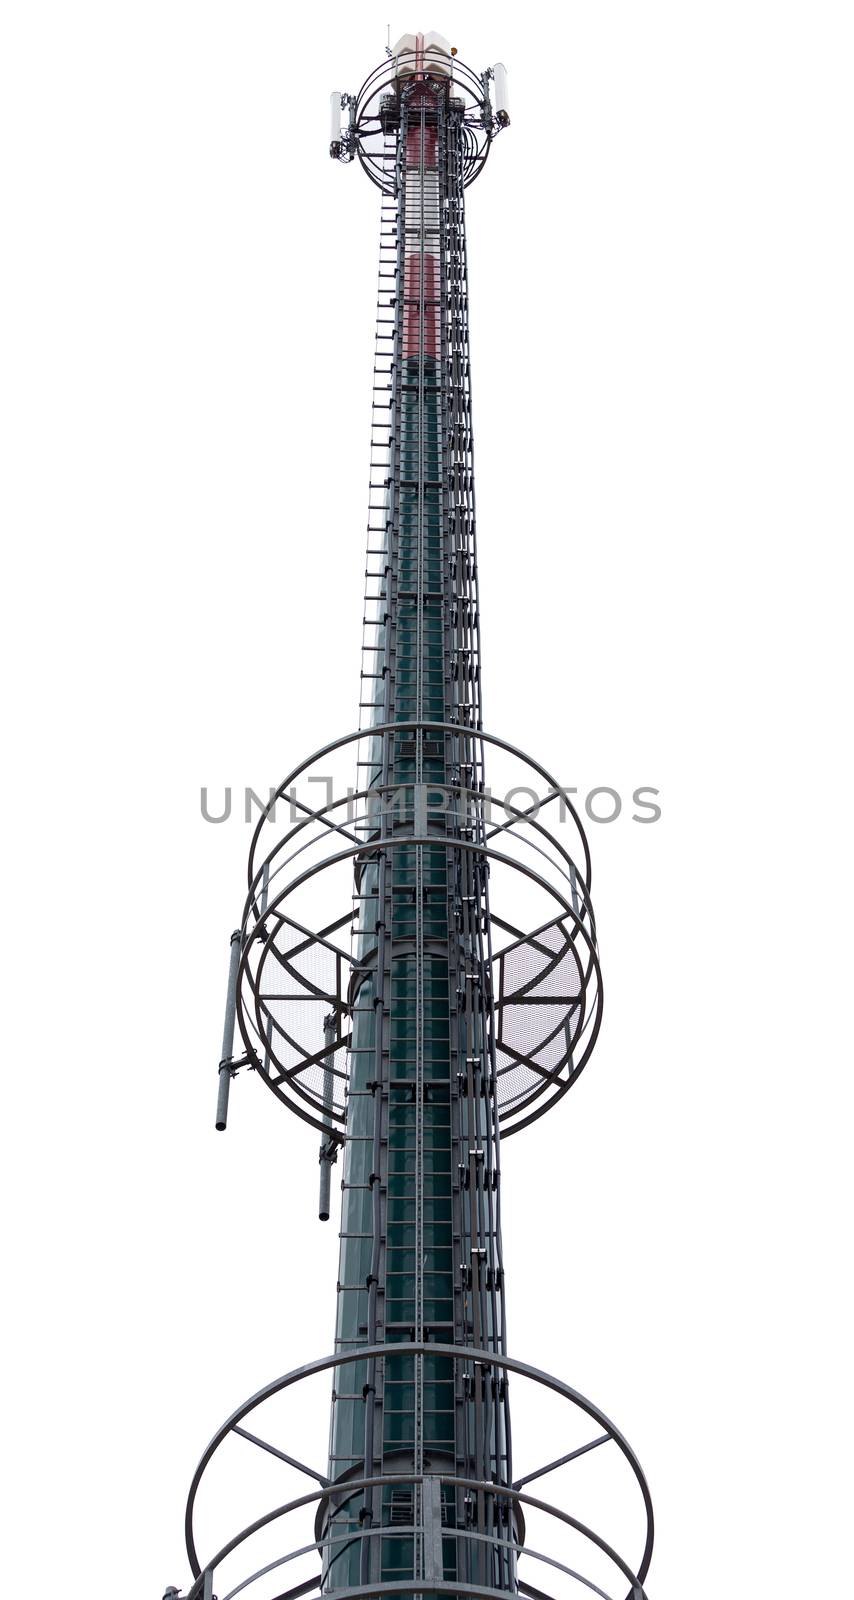 Cellular communication tower by Discovod